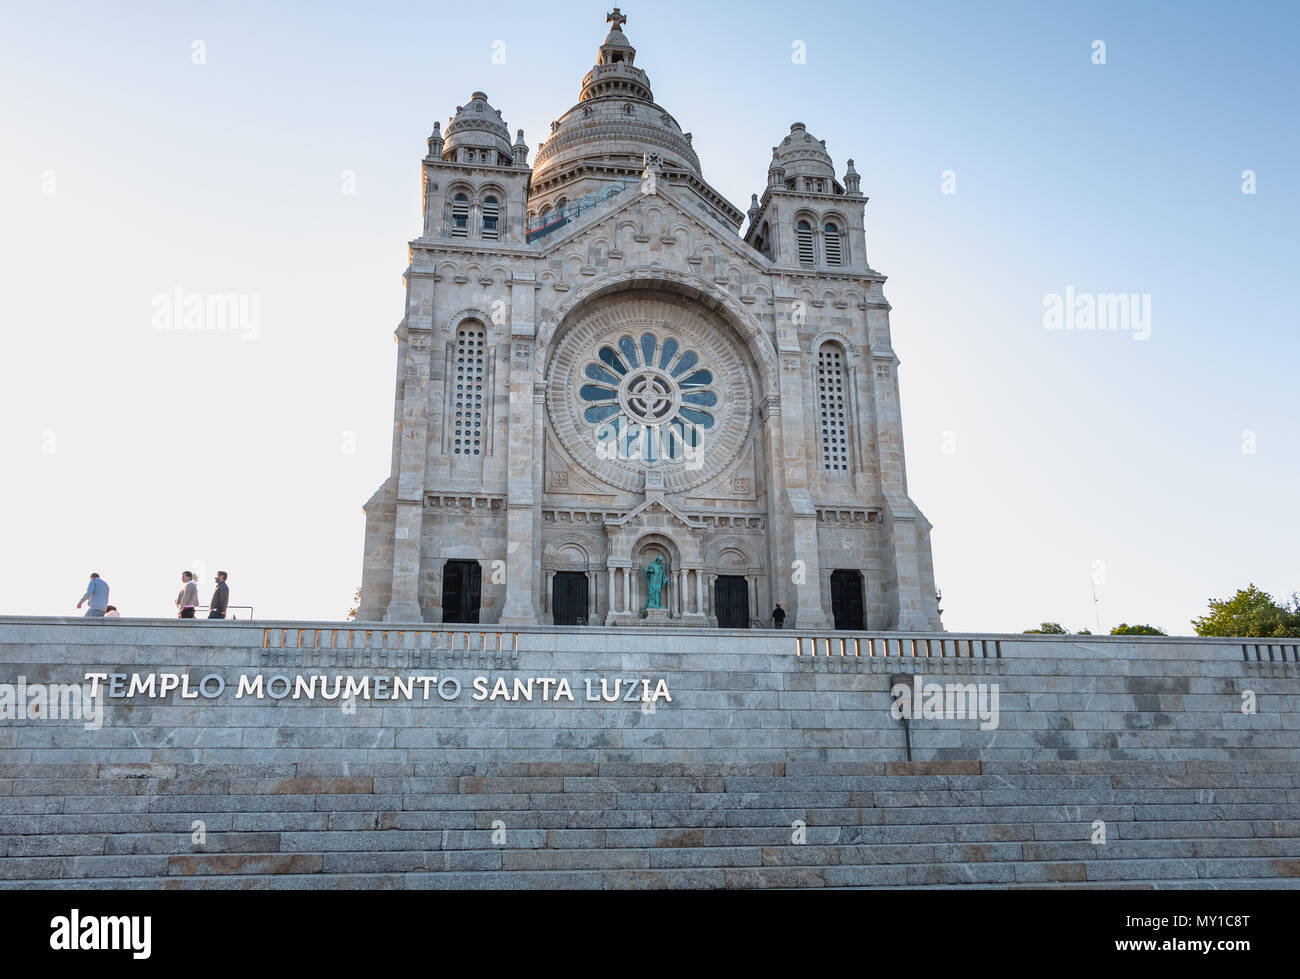 Viana do Castelo, Portugal - May 10, 2018: Architectural detail of Santa Luzia Basilica, in northern Portugal on a spring day Stock Photo